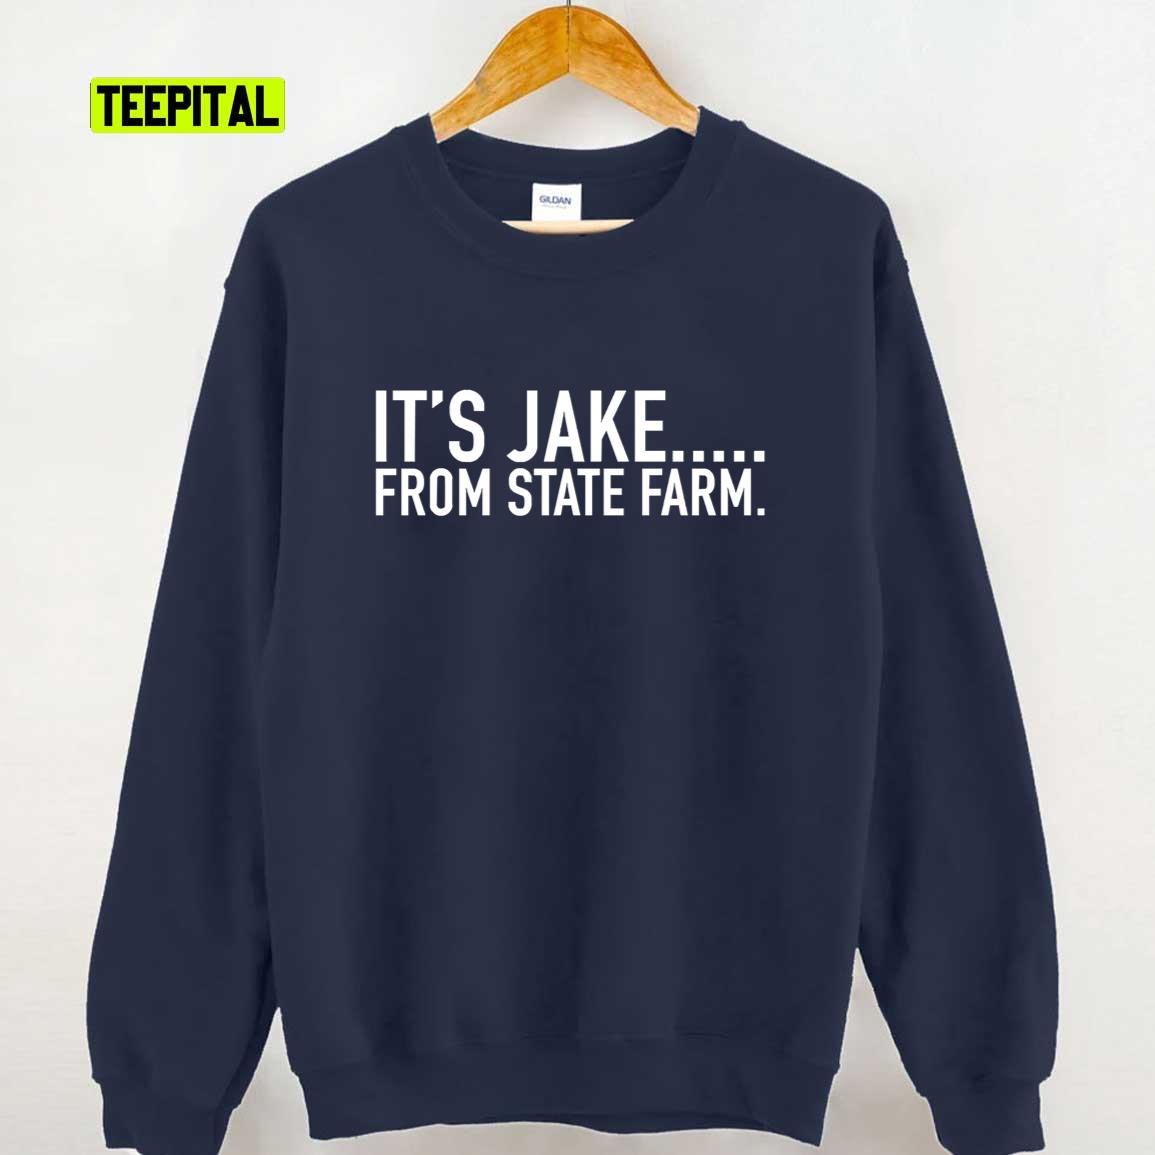 It’s Jake From State Farm Insurance Slogans Funny T-Shirt